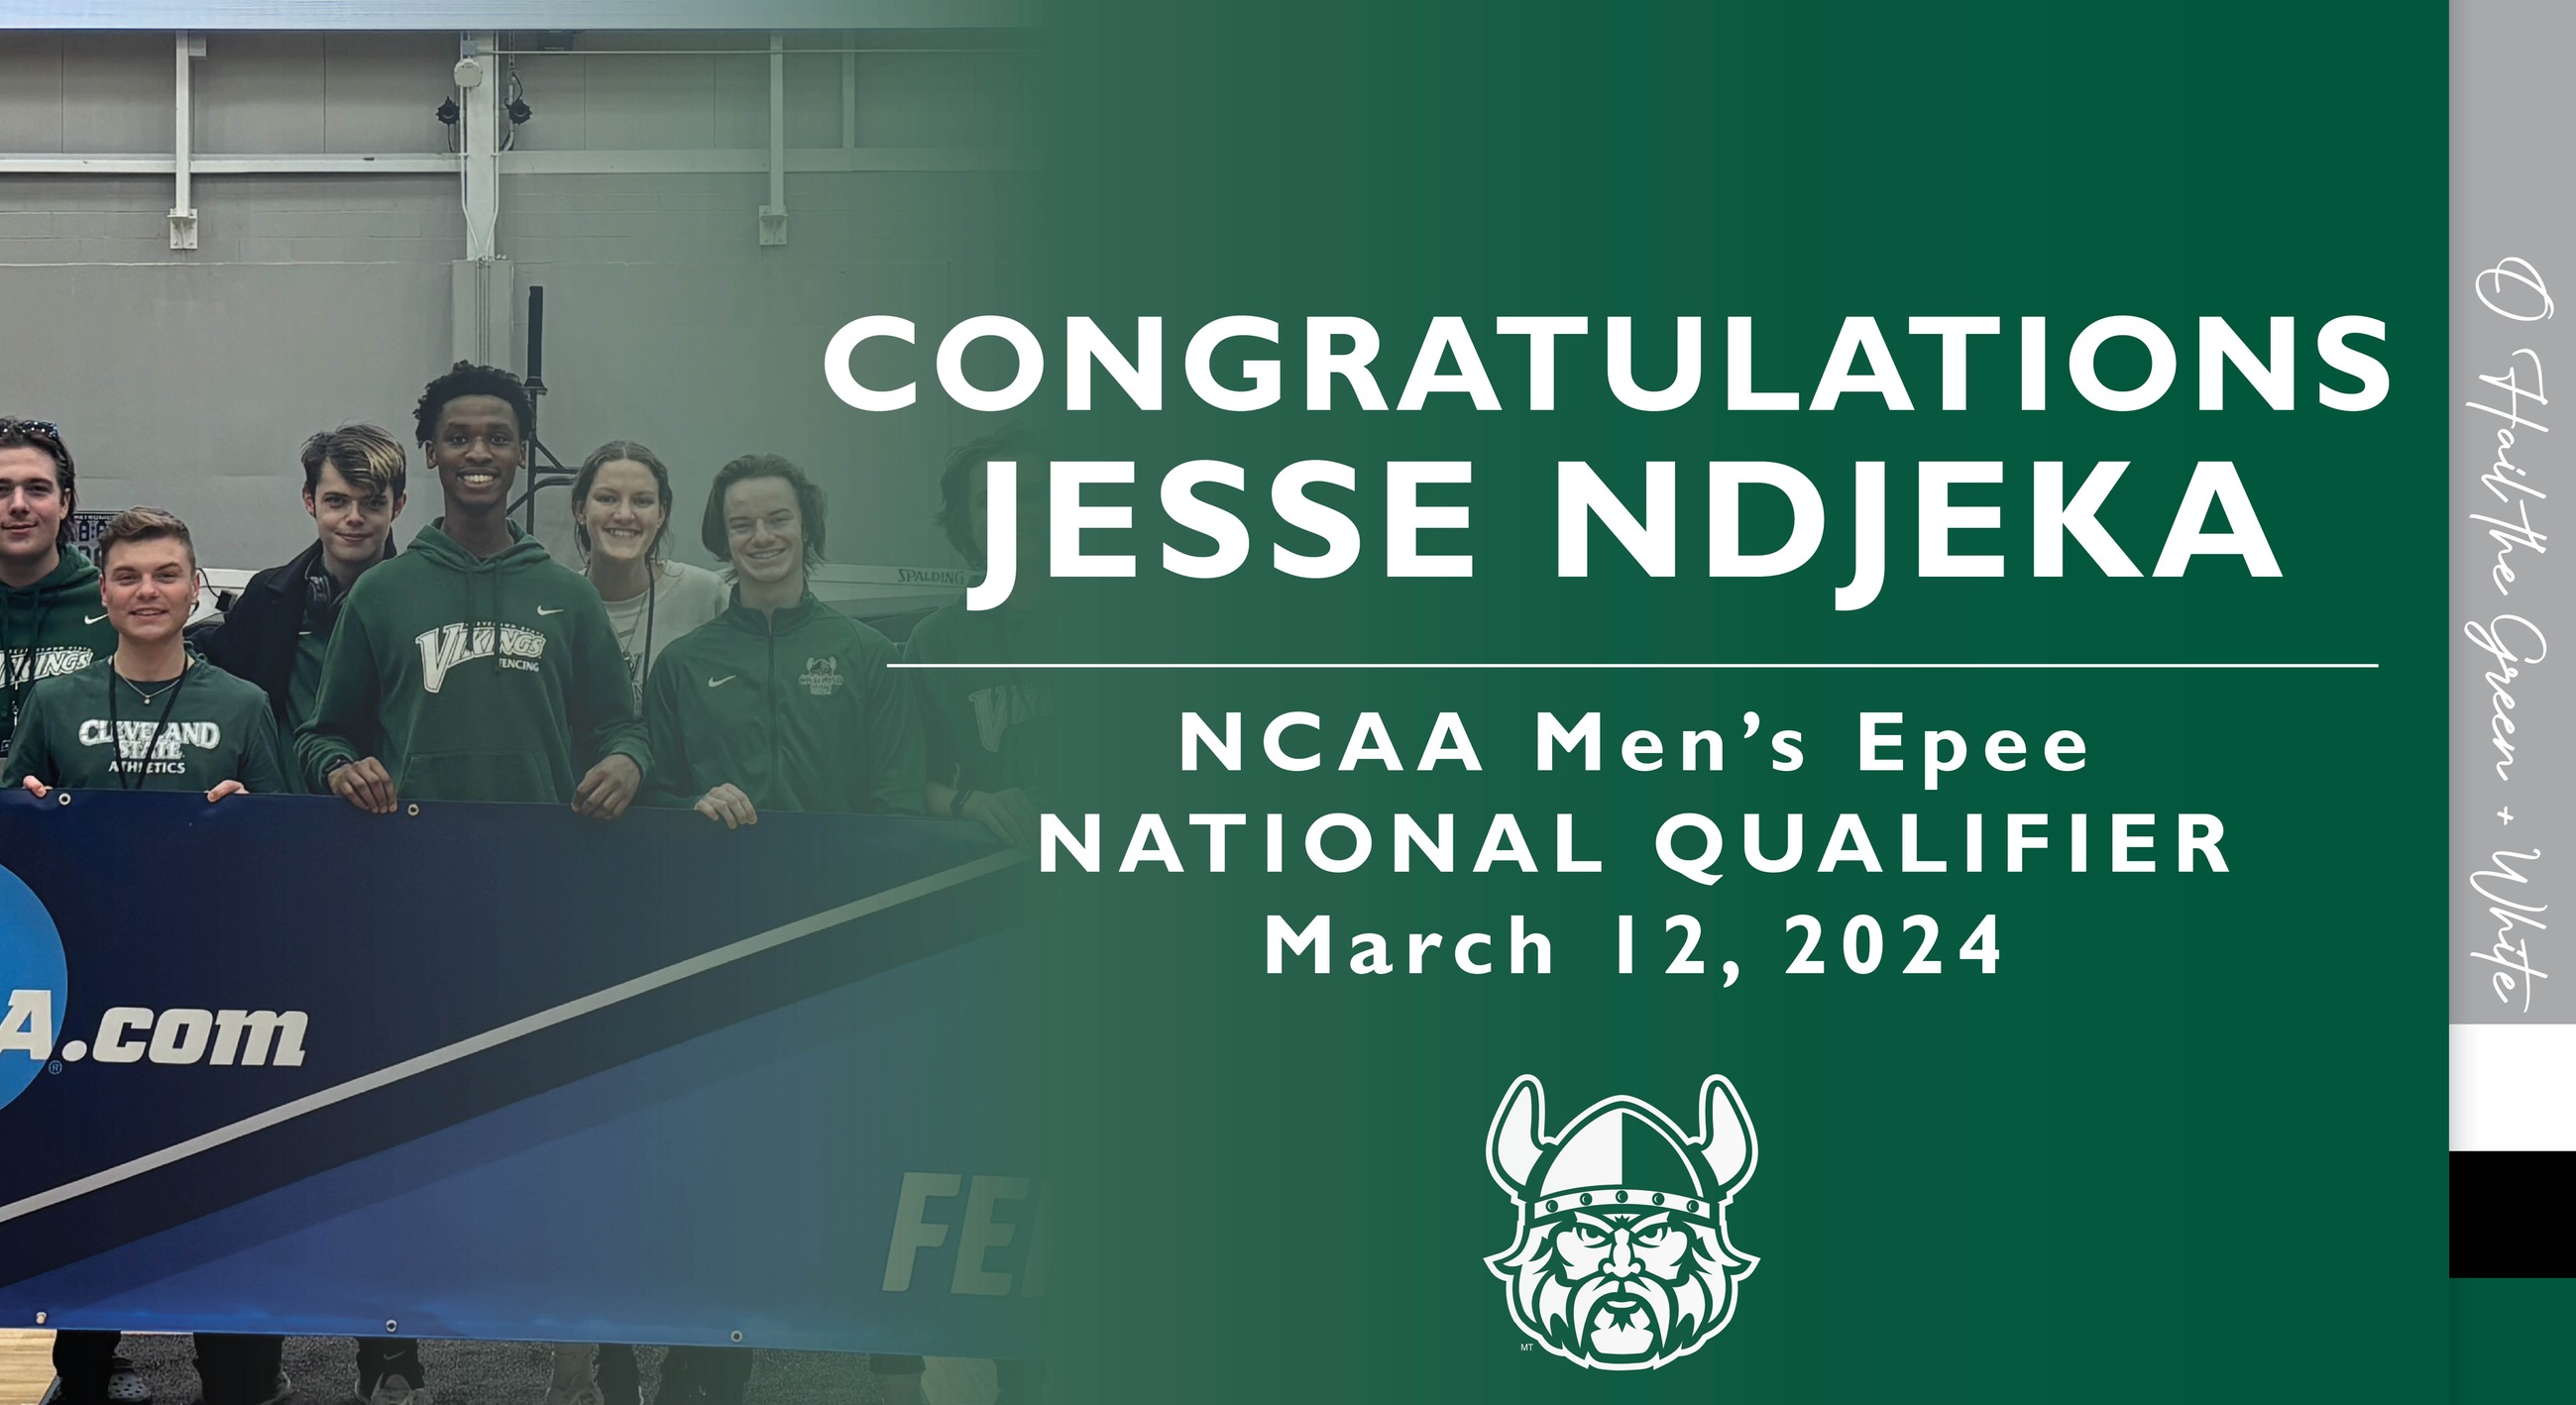 Jesse Ndjeka Qualifies for NCAA Fencing National Championship in Men&rsquo;s Epee